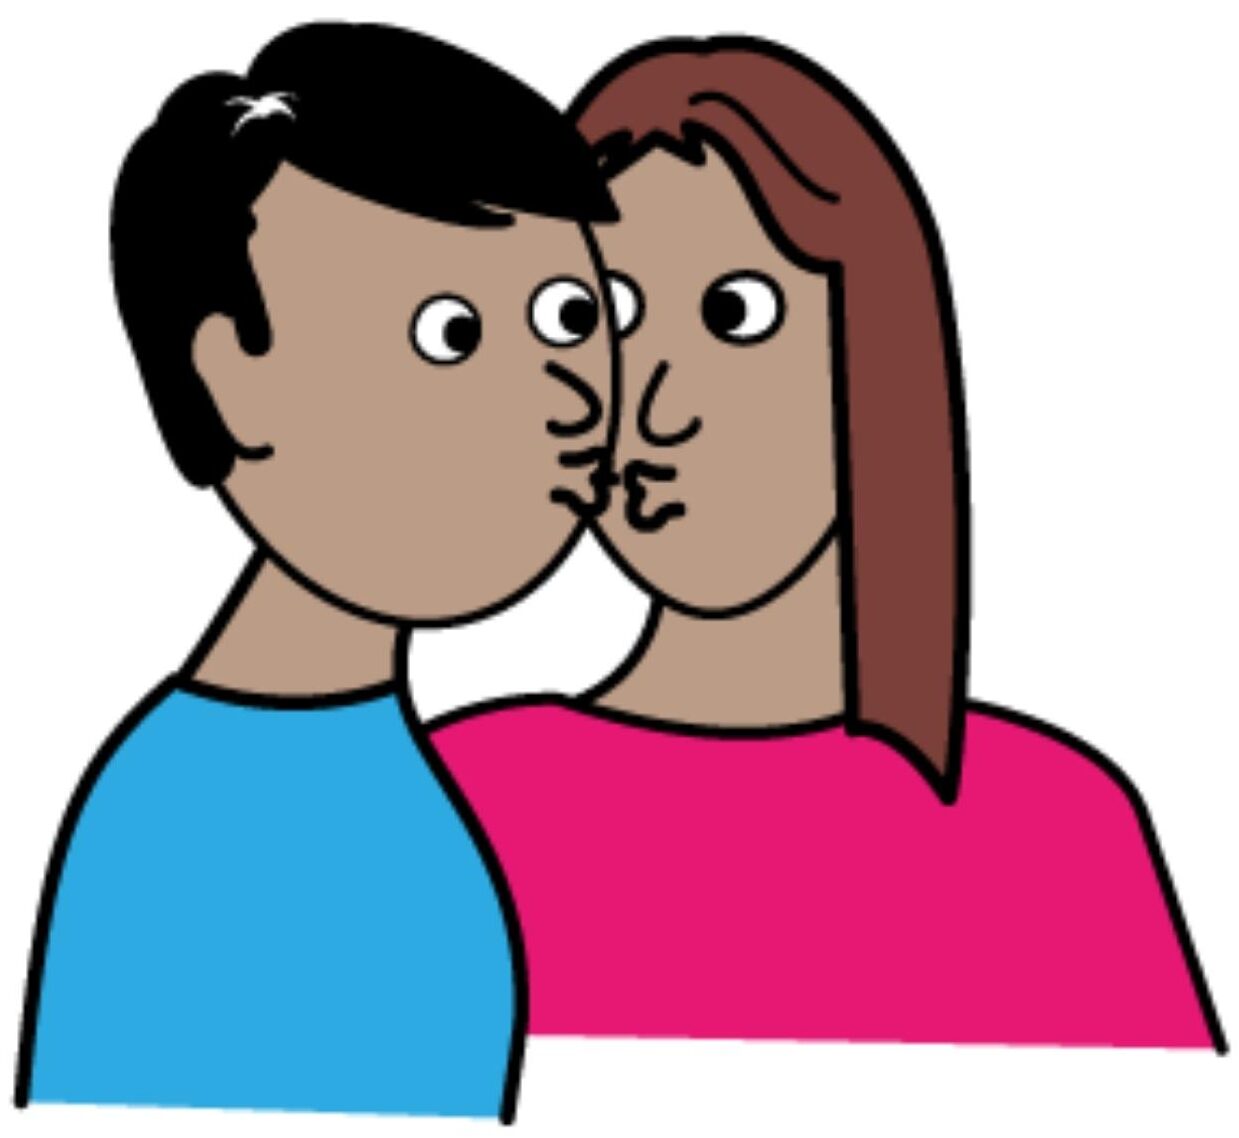 image of a man and a woman kissing